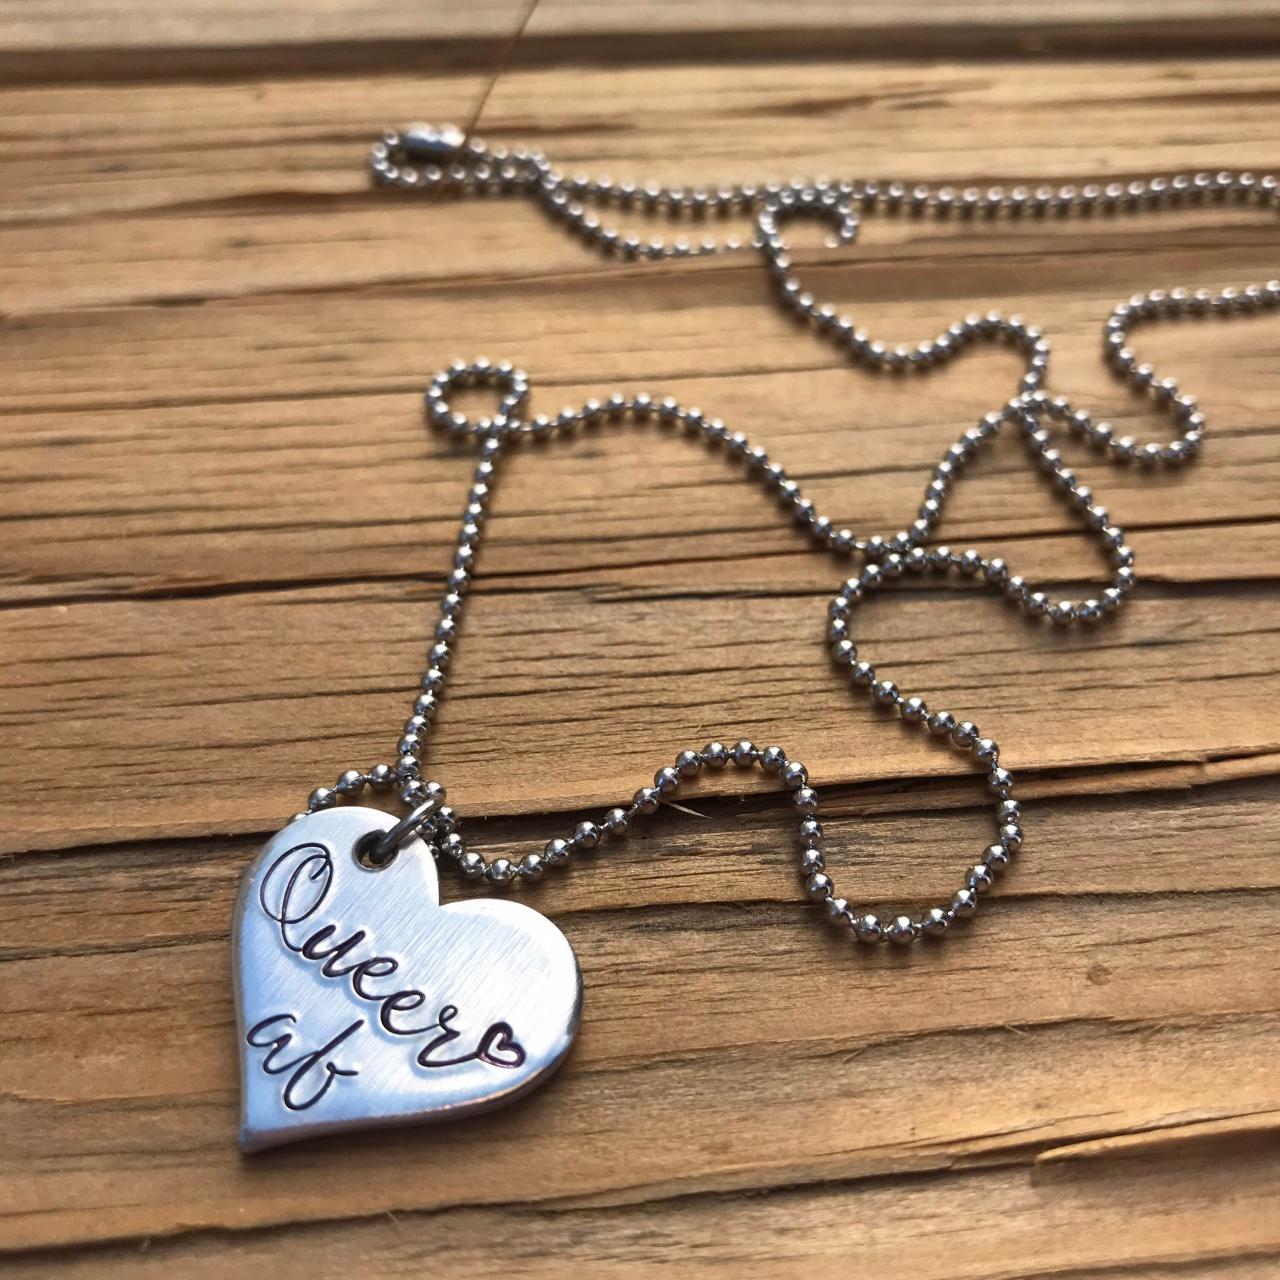 Queer AF ball chain necklace, aluminum fancy, lightweight, subtle pride present, girlfriend gift, coming out, Pride, hand stamped metal